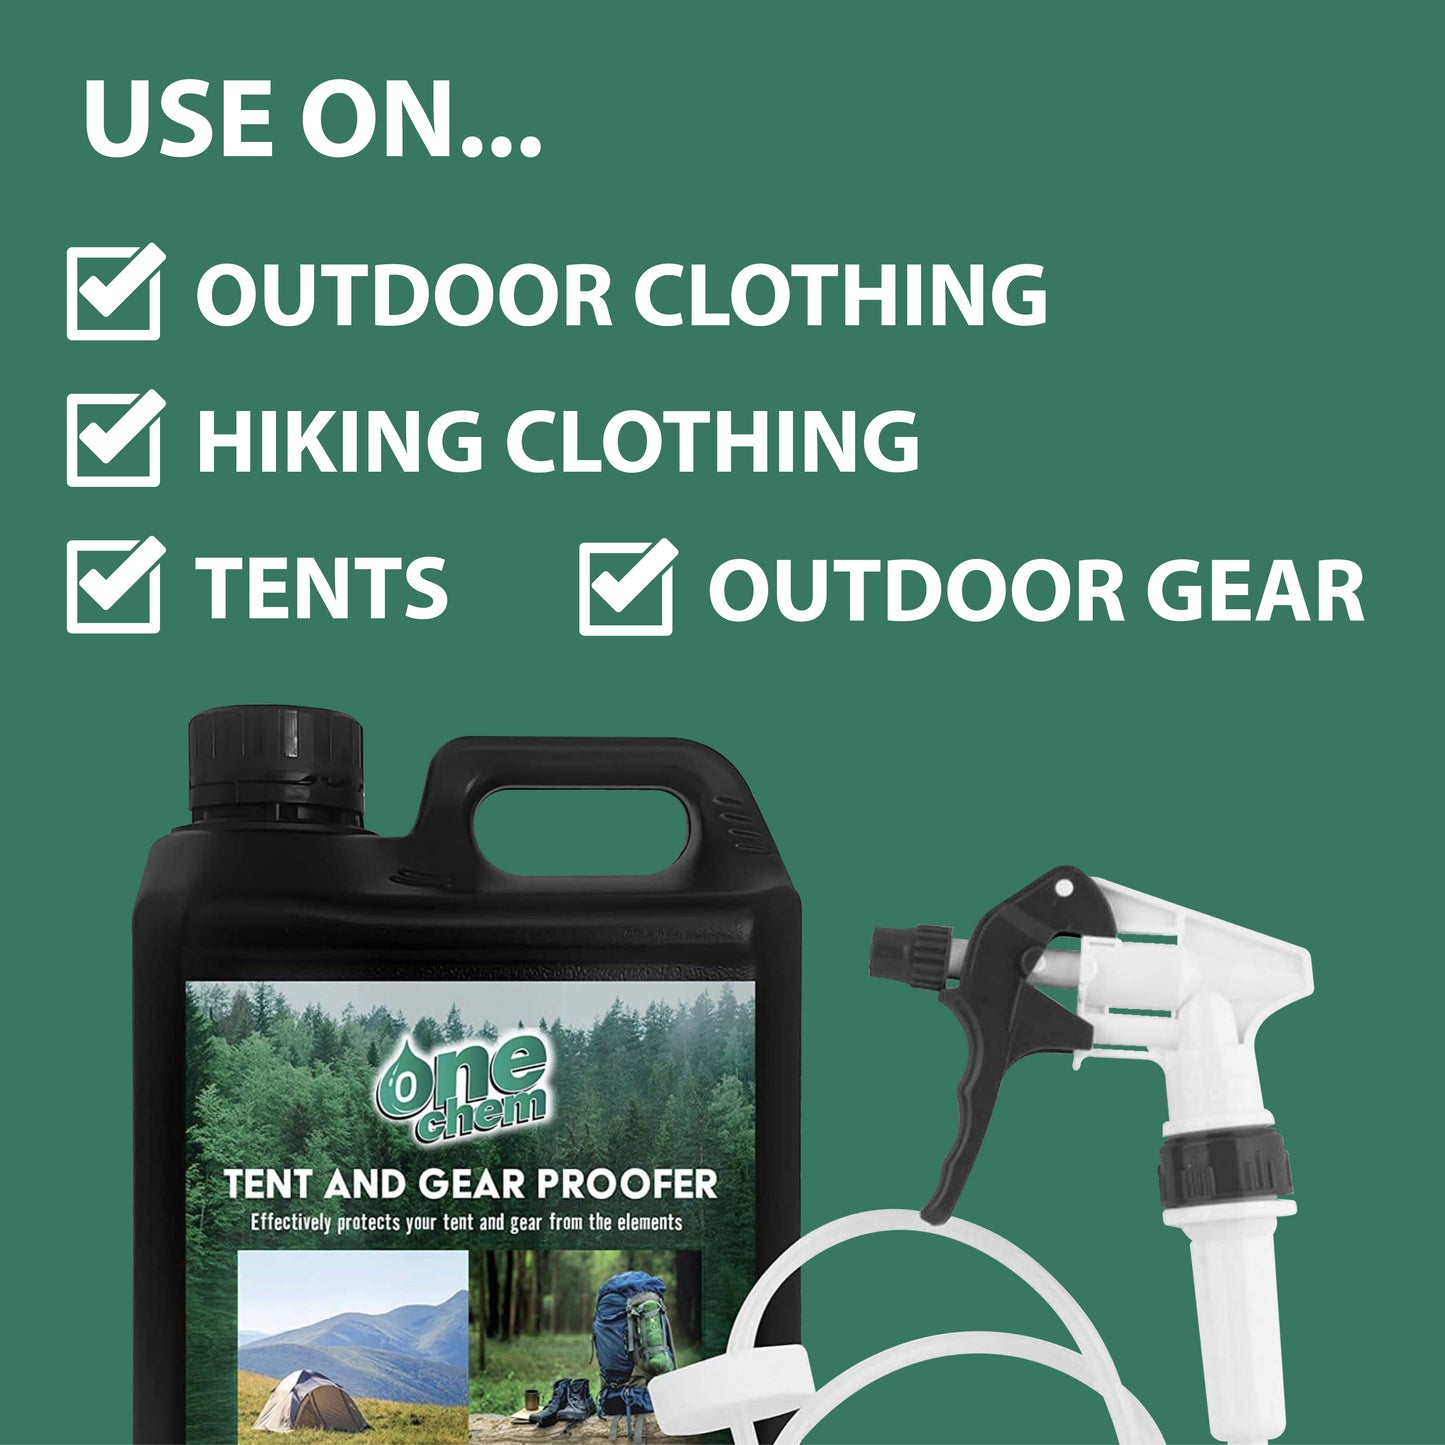 One Chem Tent and Gear Proofer 5L (with Long Hose Trigger)